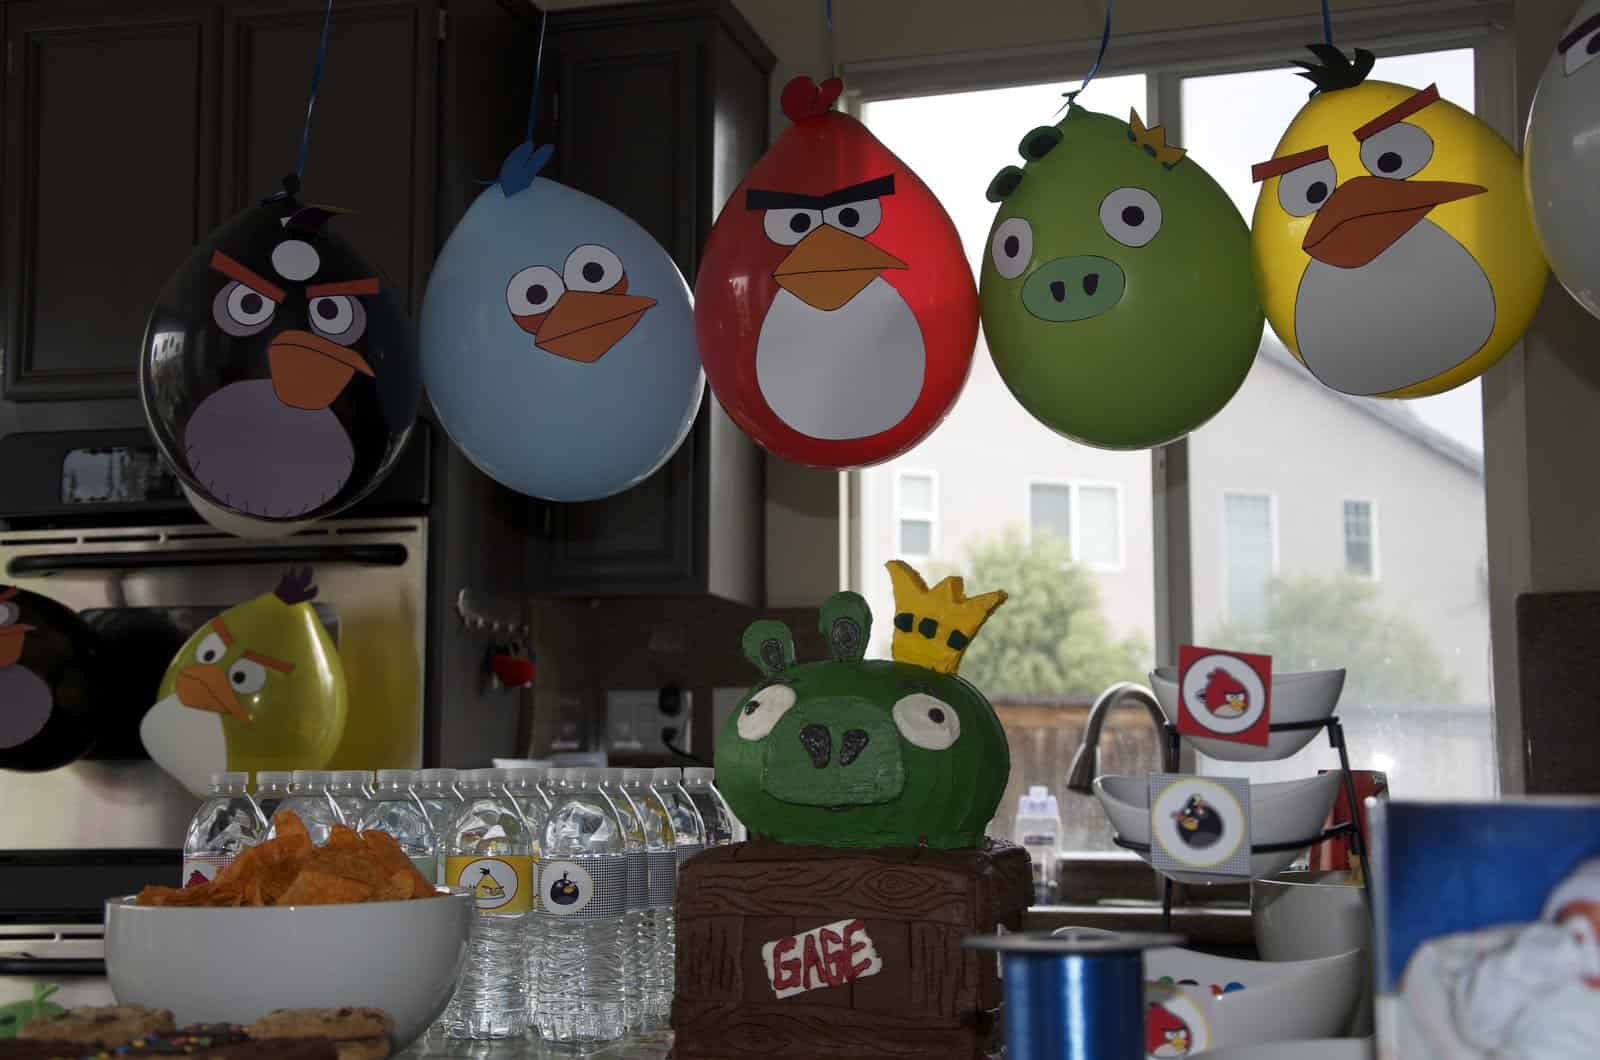 Angry Birds Party Ideas - events to CELEBRATE!